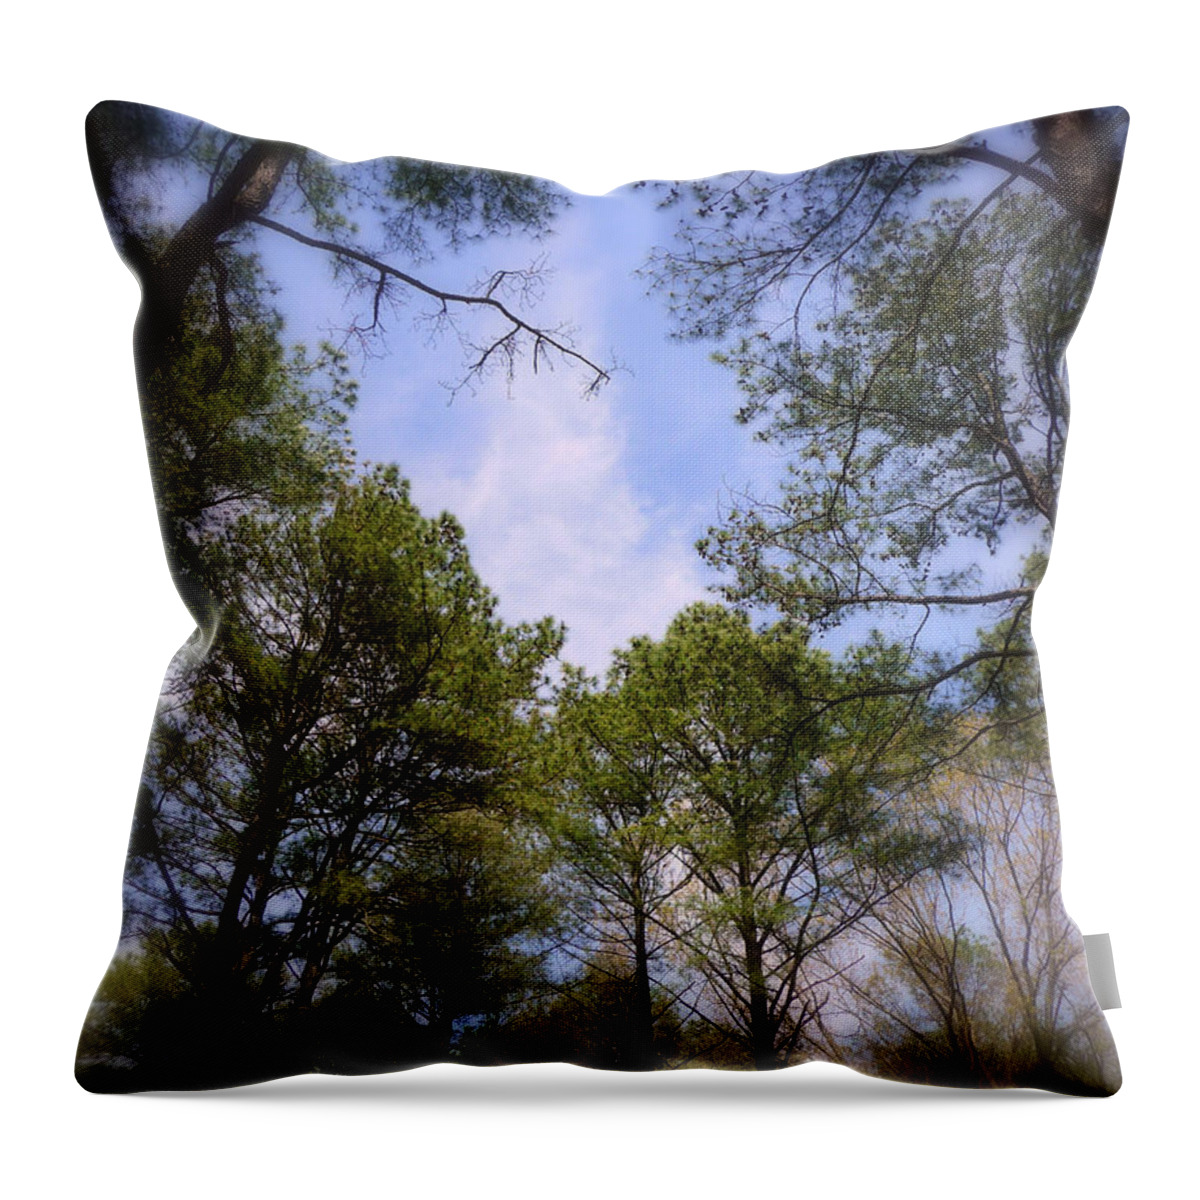 Blue Skies Throw Pillow featuring the photograph Looking Up by Jim Whalen